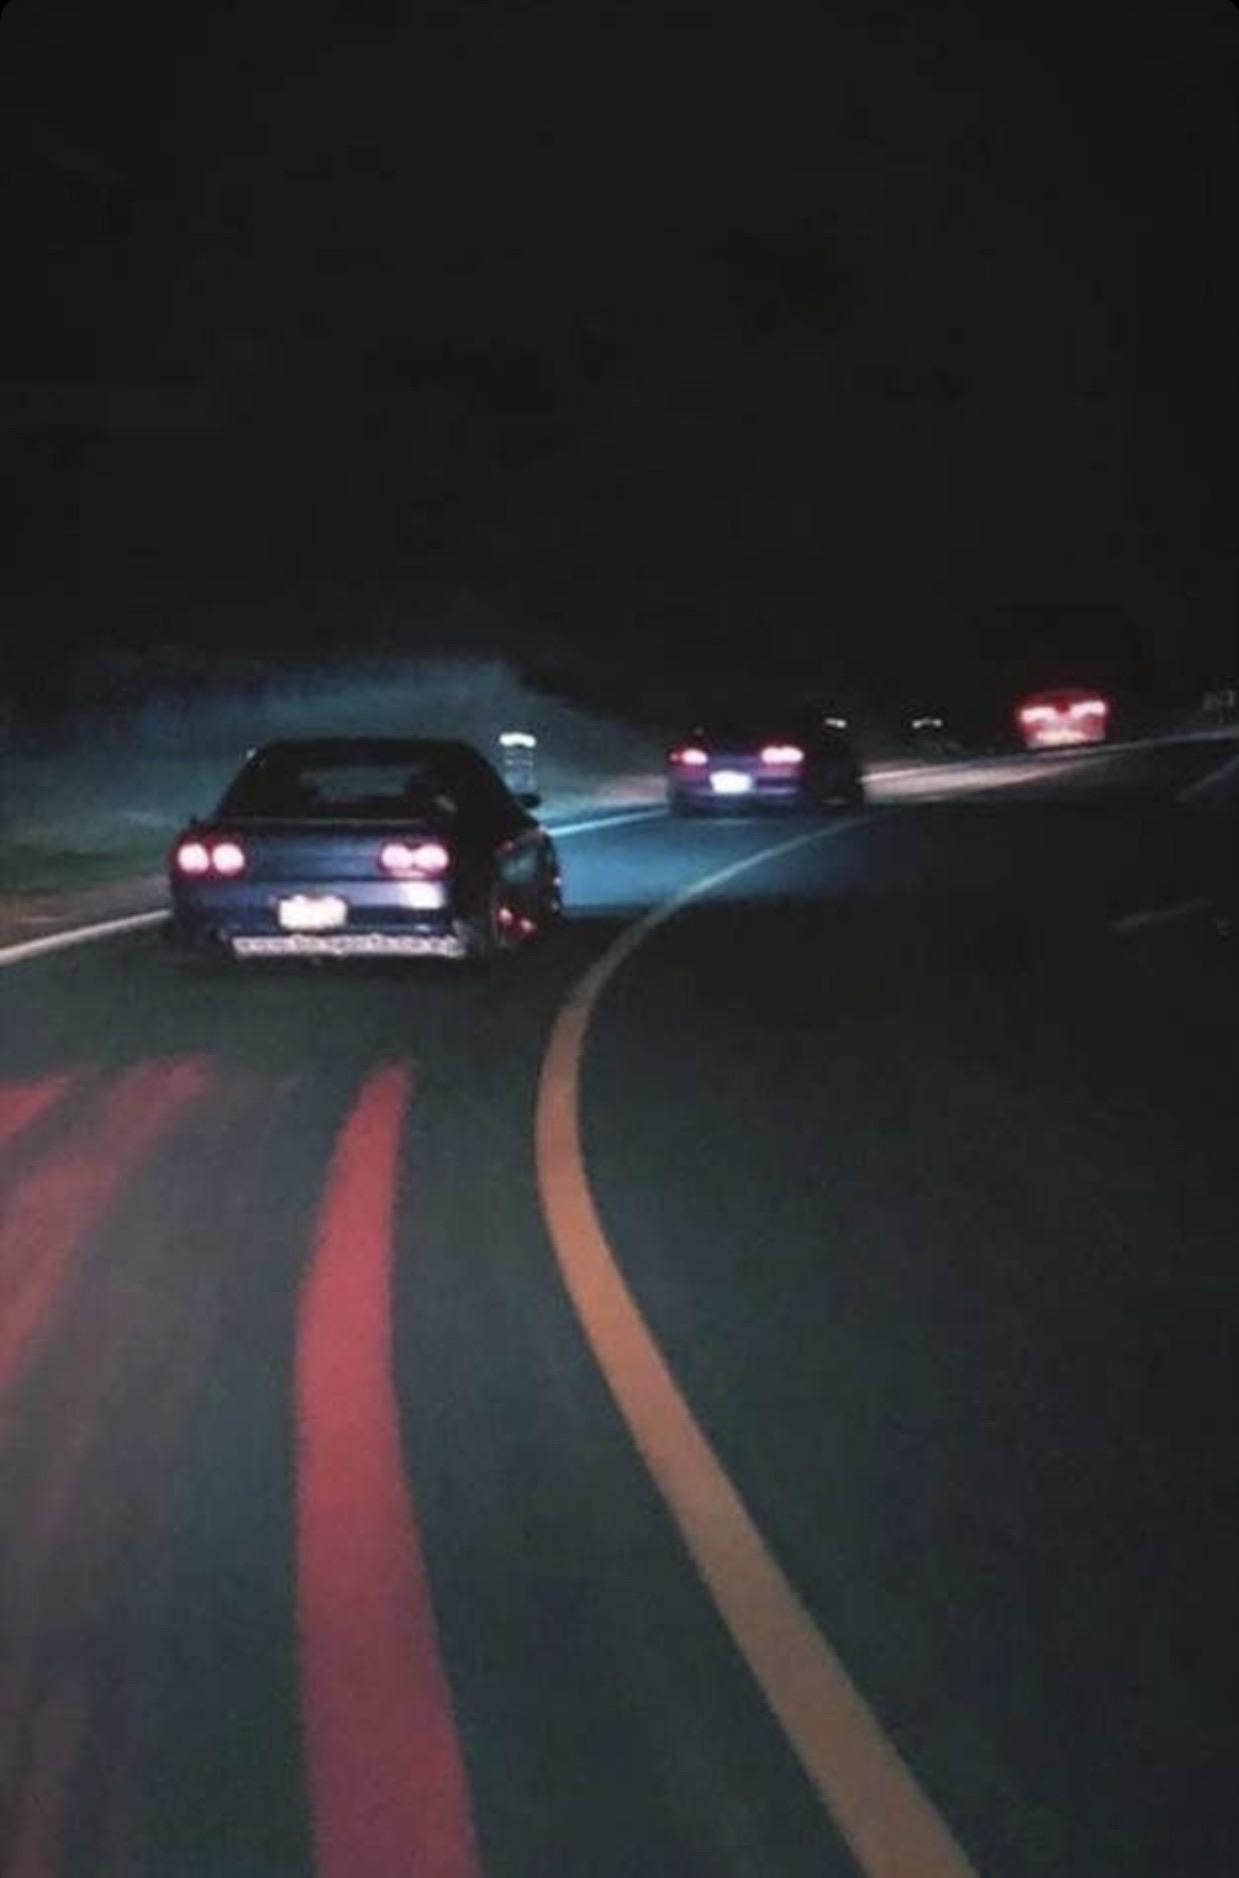 RUNNING IN THE 90s!: JDM